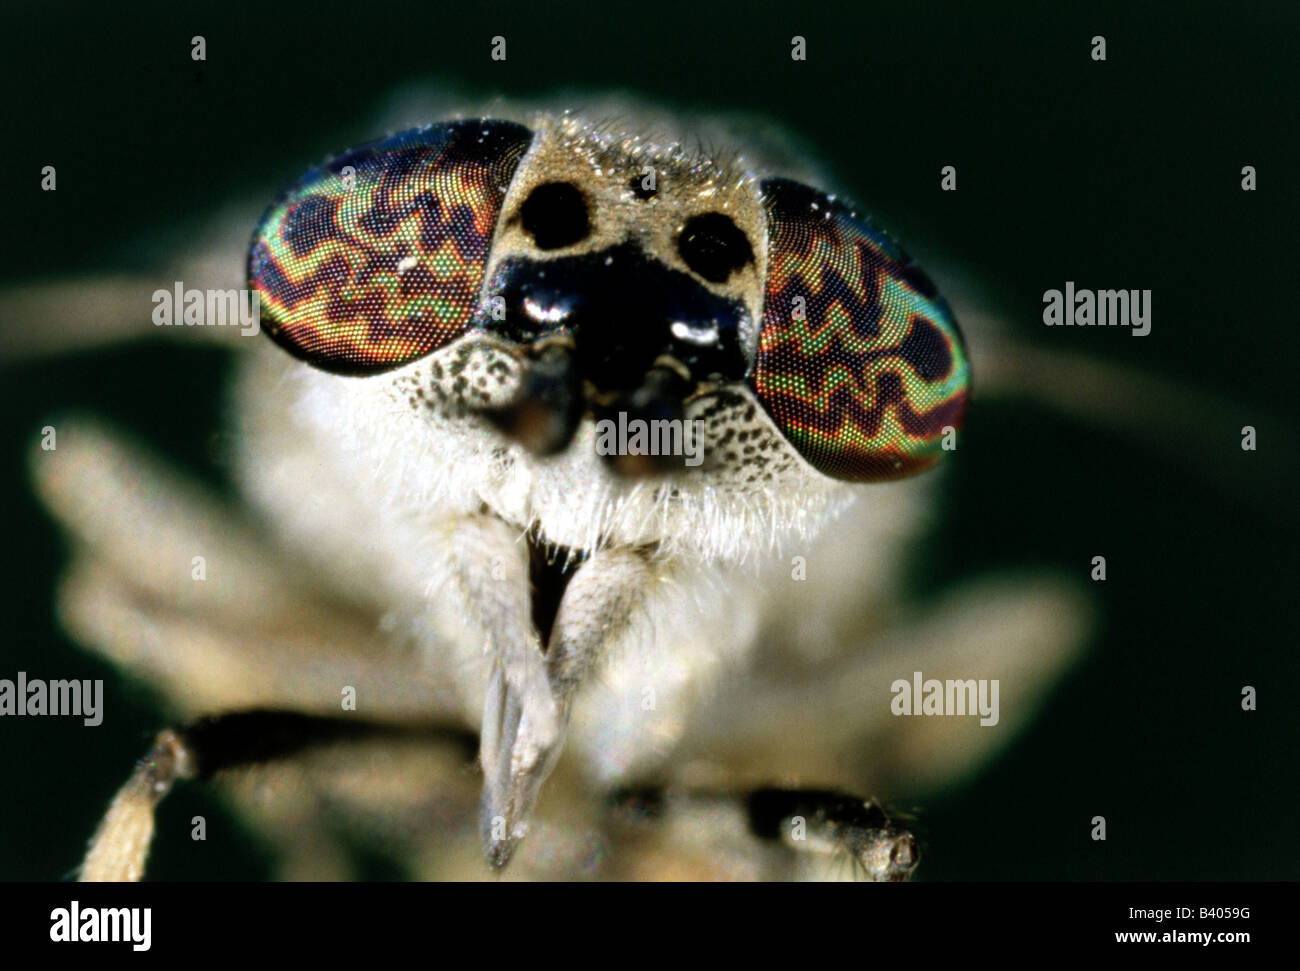 zoology / animals, insects, flies, horse-flies, Chrysozona pluvialis, detail: head with compund eyes, distribution: Europe, eye, Stock Photo